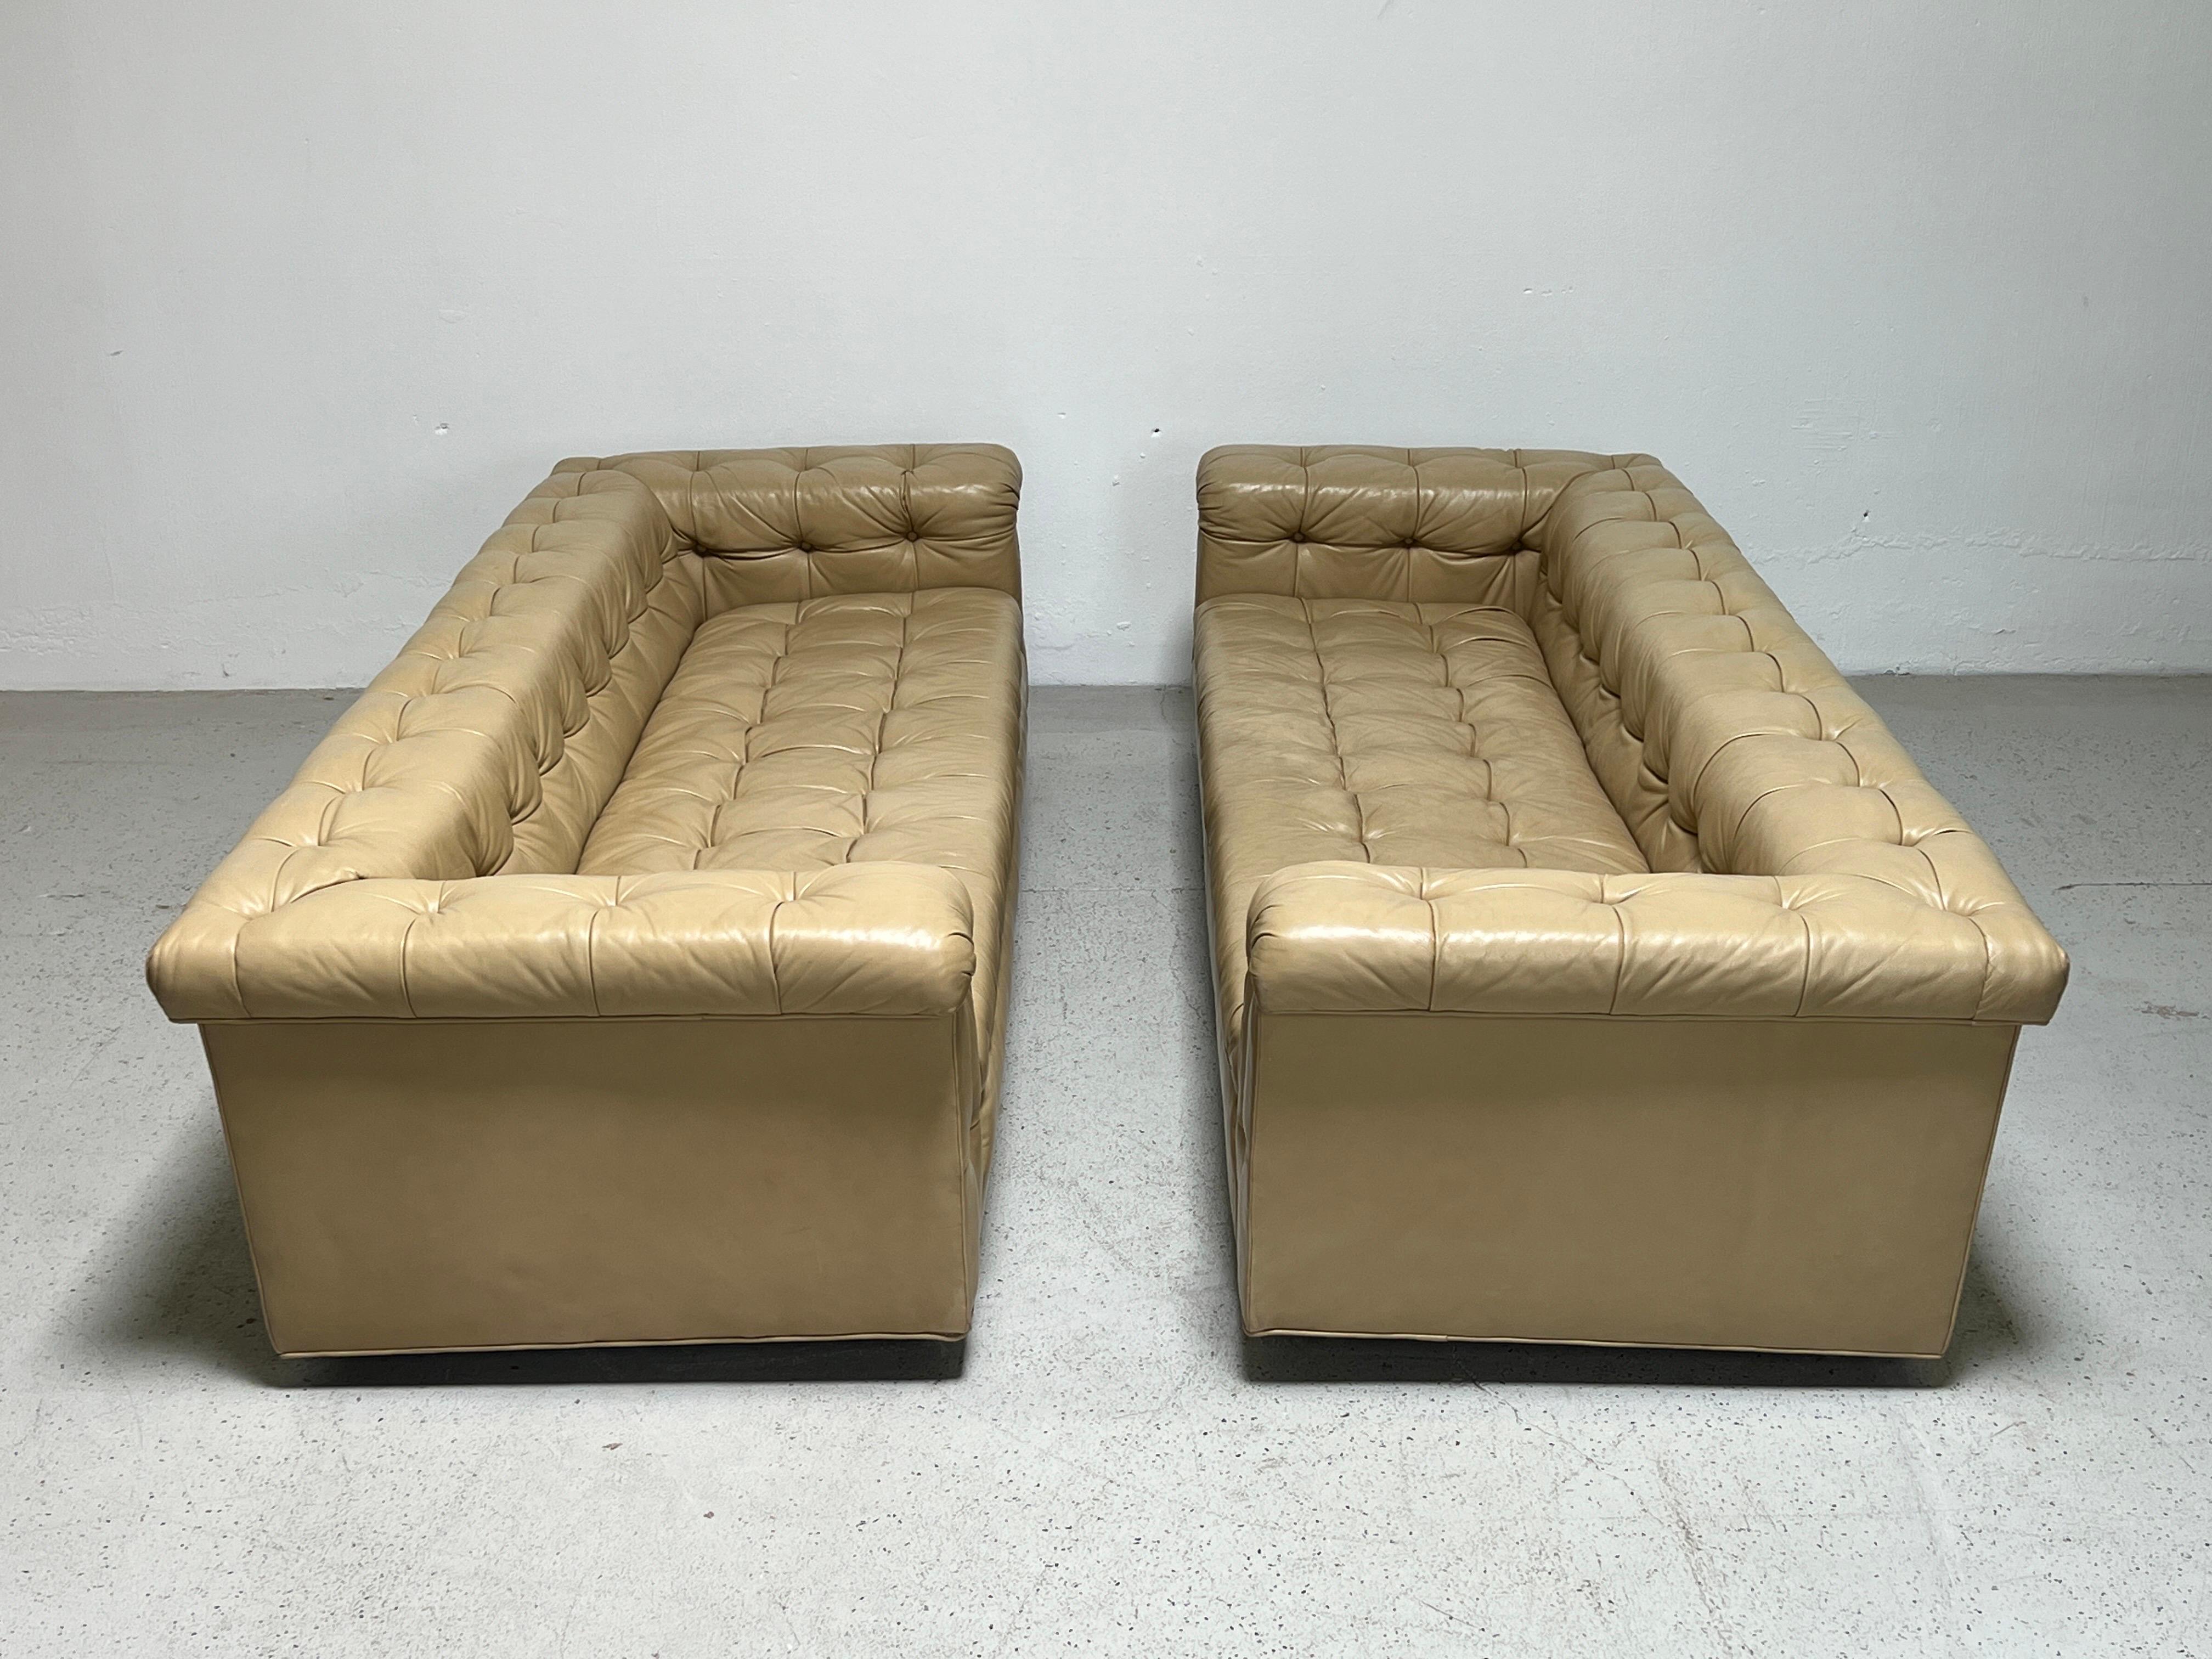 Pair of Party Sofas by Edward Wormley for Dunbar in Original Leather For Sale 8